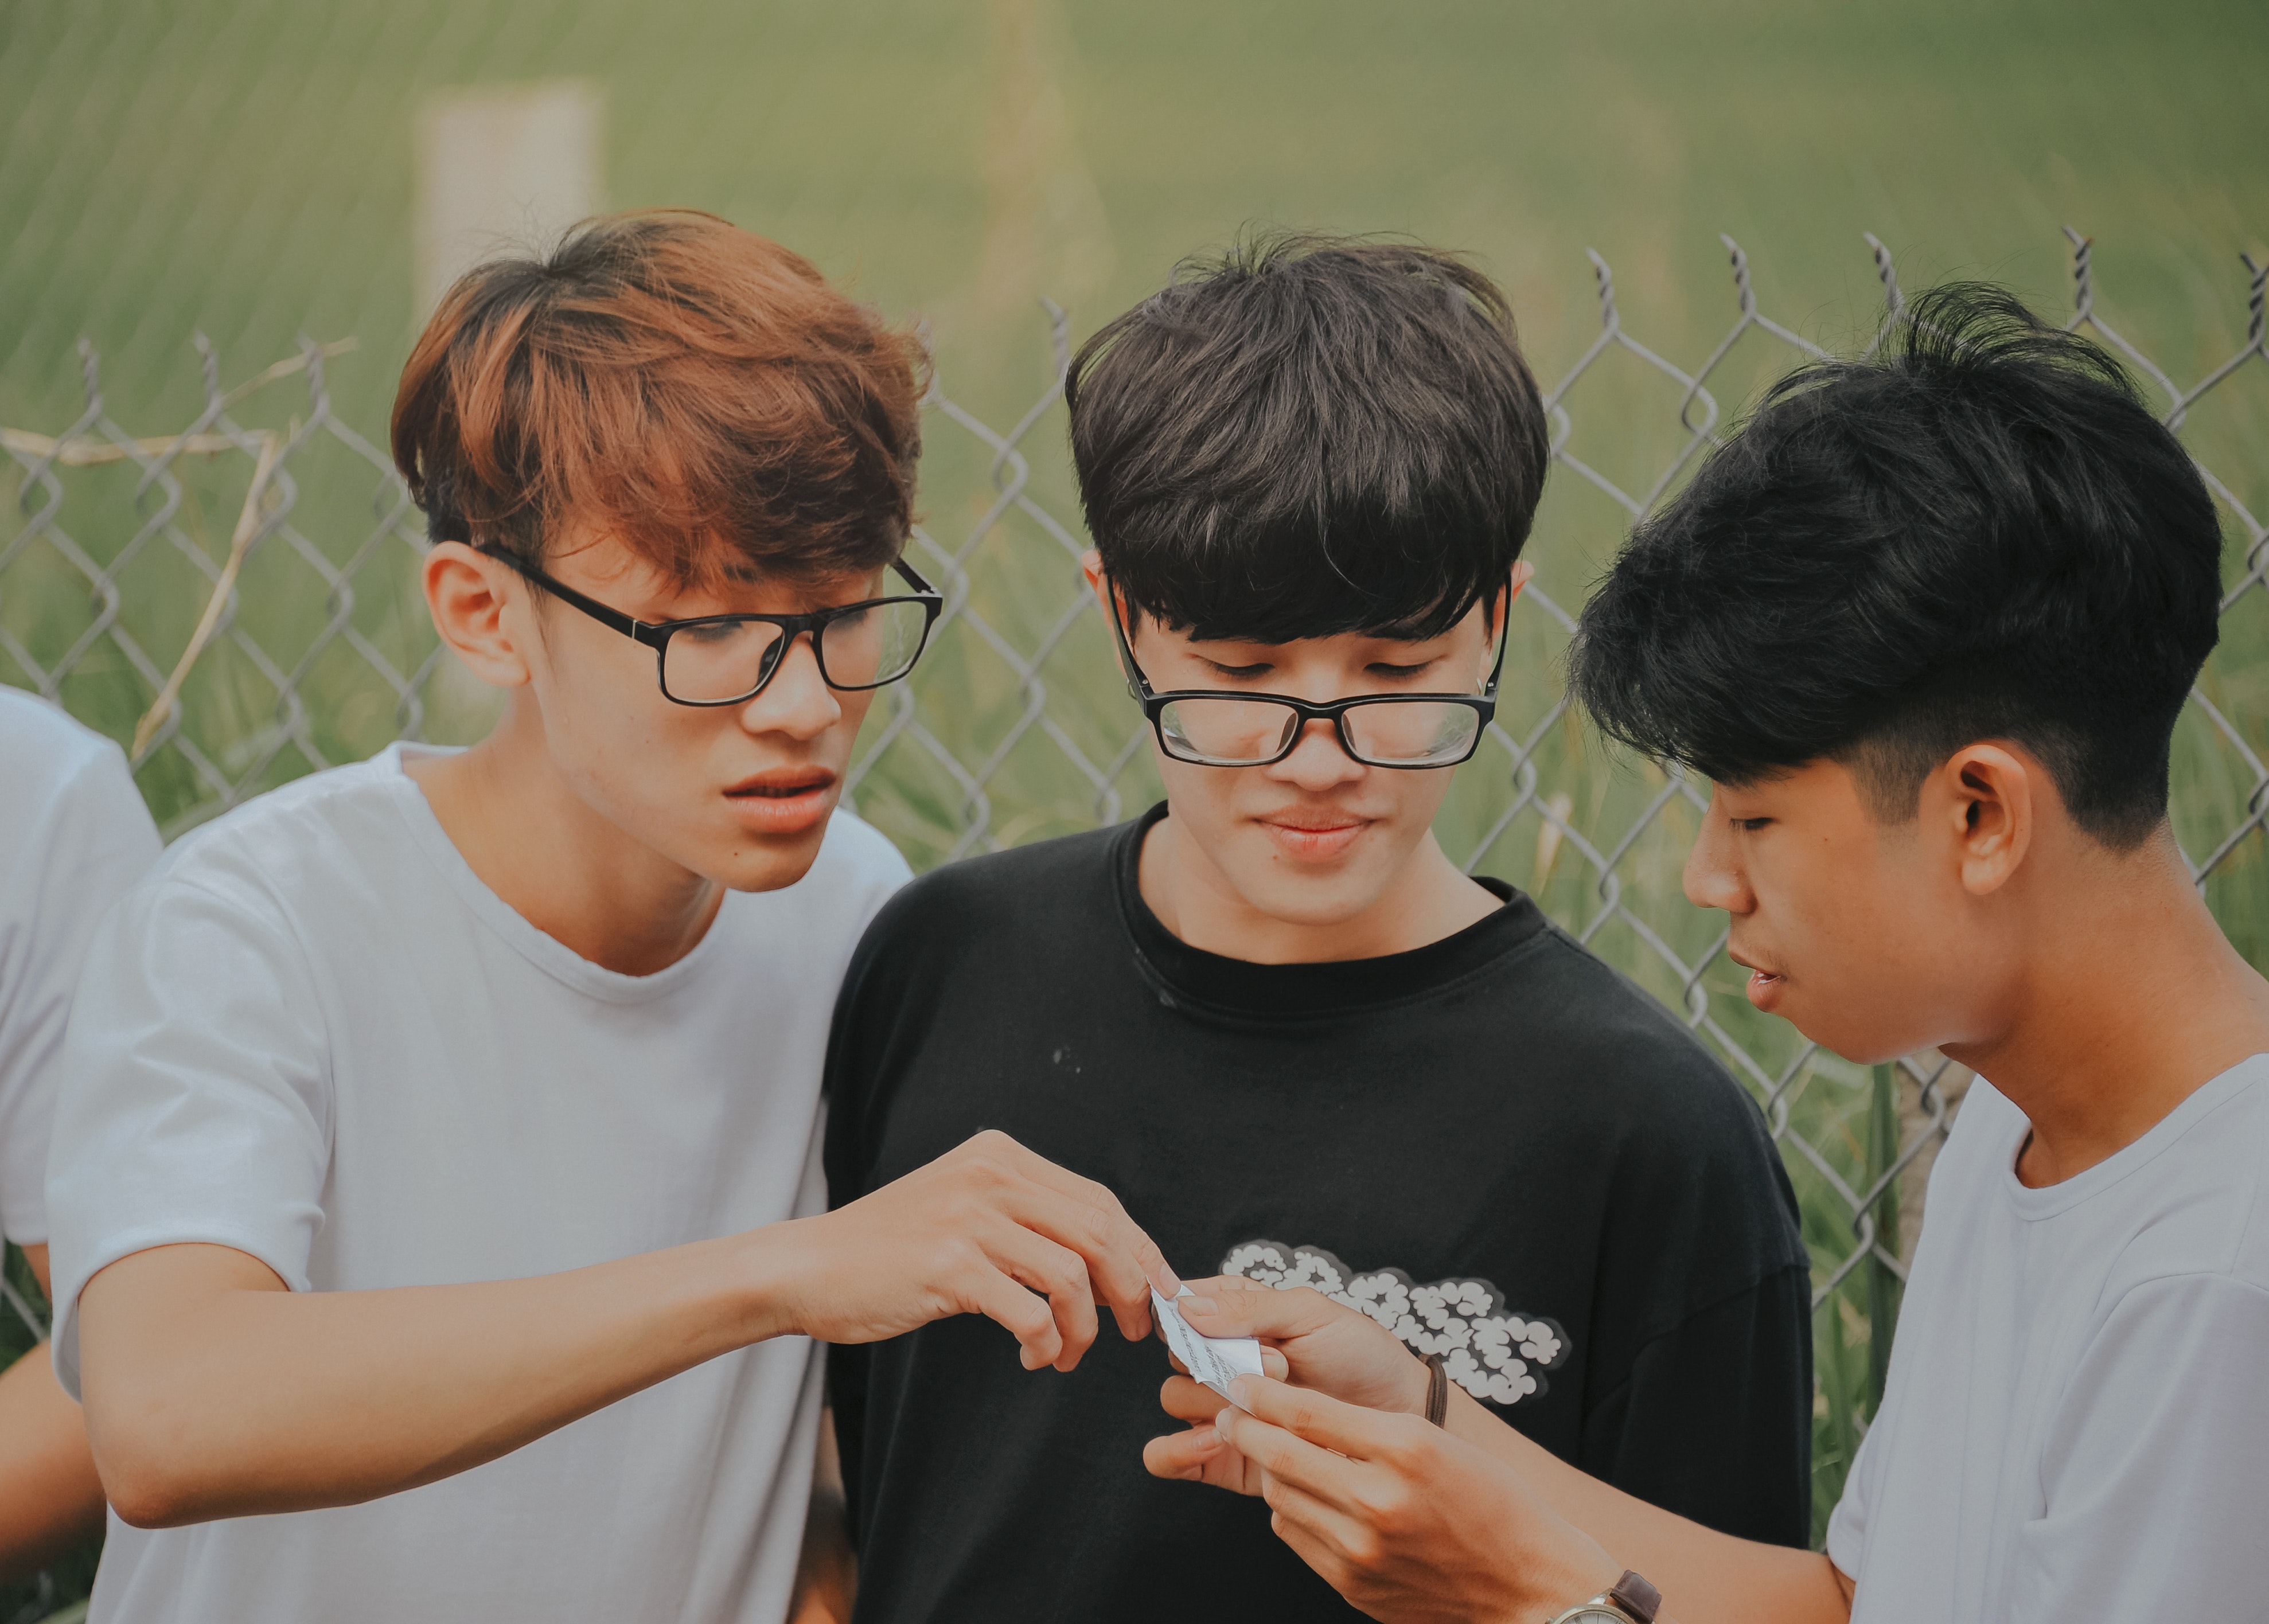 three adolescent boys look at a note together